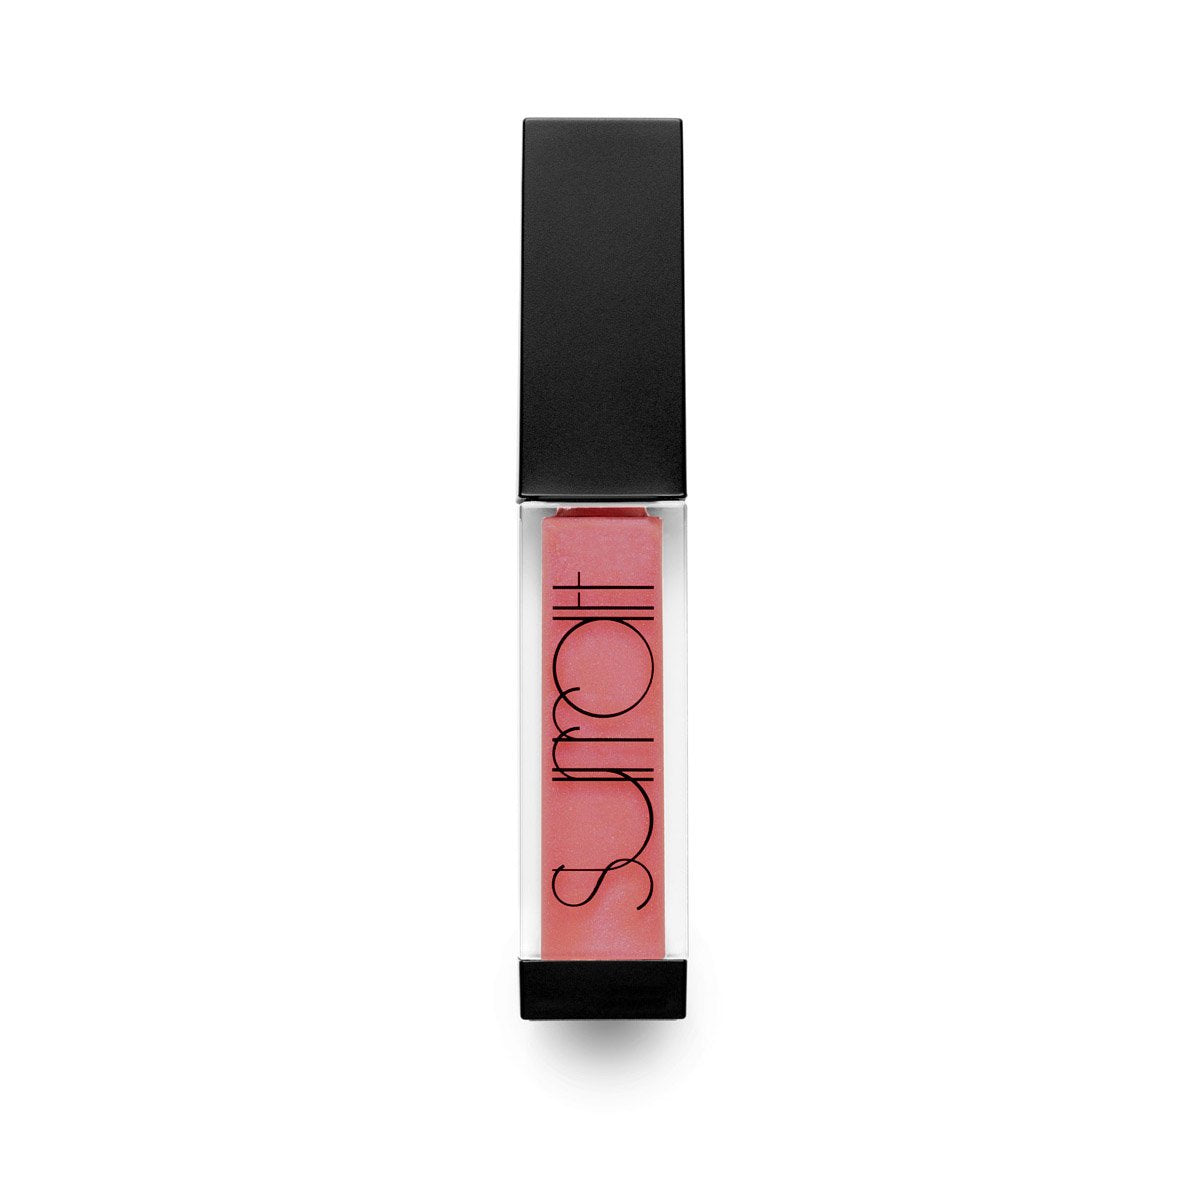 SOIGNE - WARM PINK WITH GOLD SHIMMER - high shine shimmering lip gloss in warm pink with gold glitter